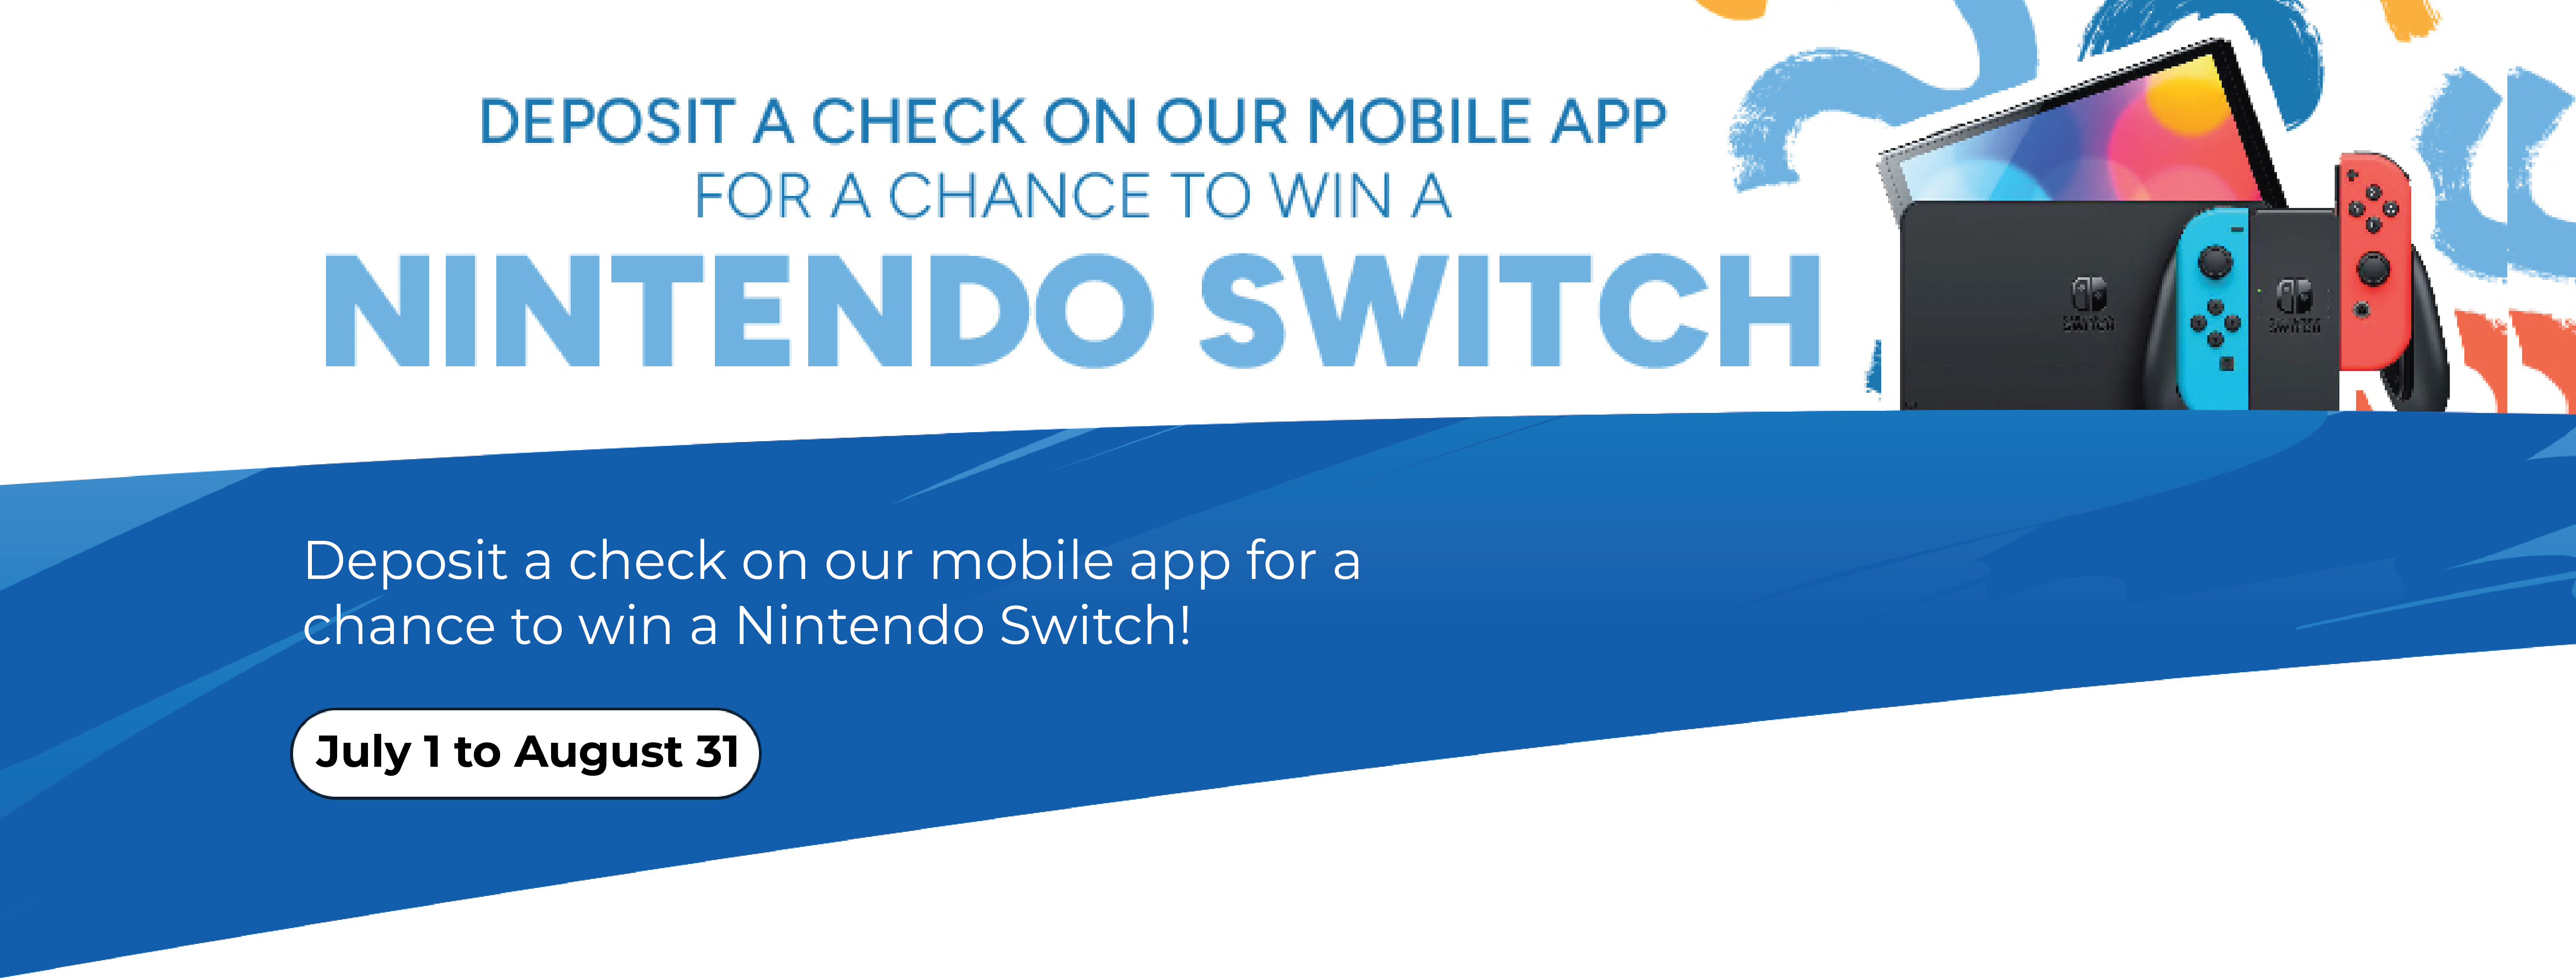 Deposit a check on our mobile app for a chance to win a Nintendo Switch